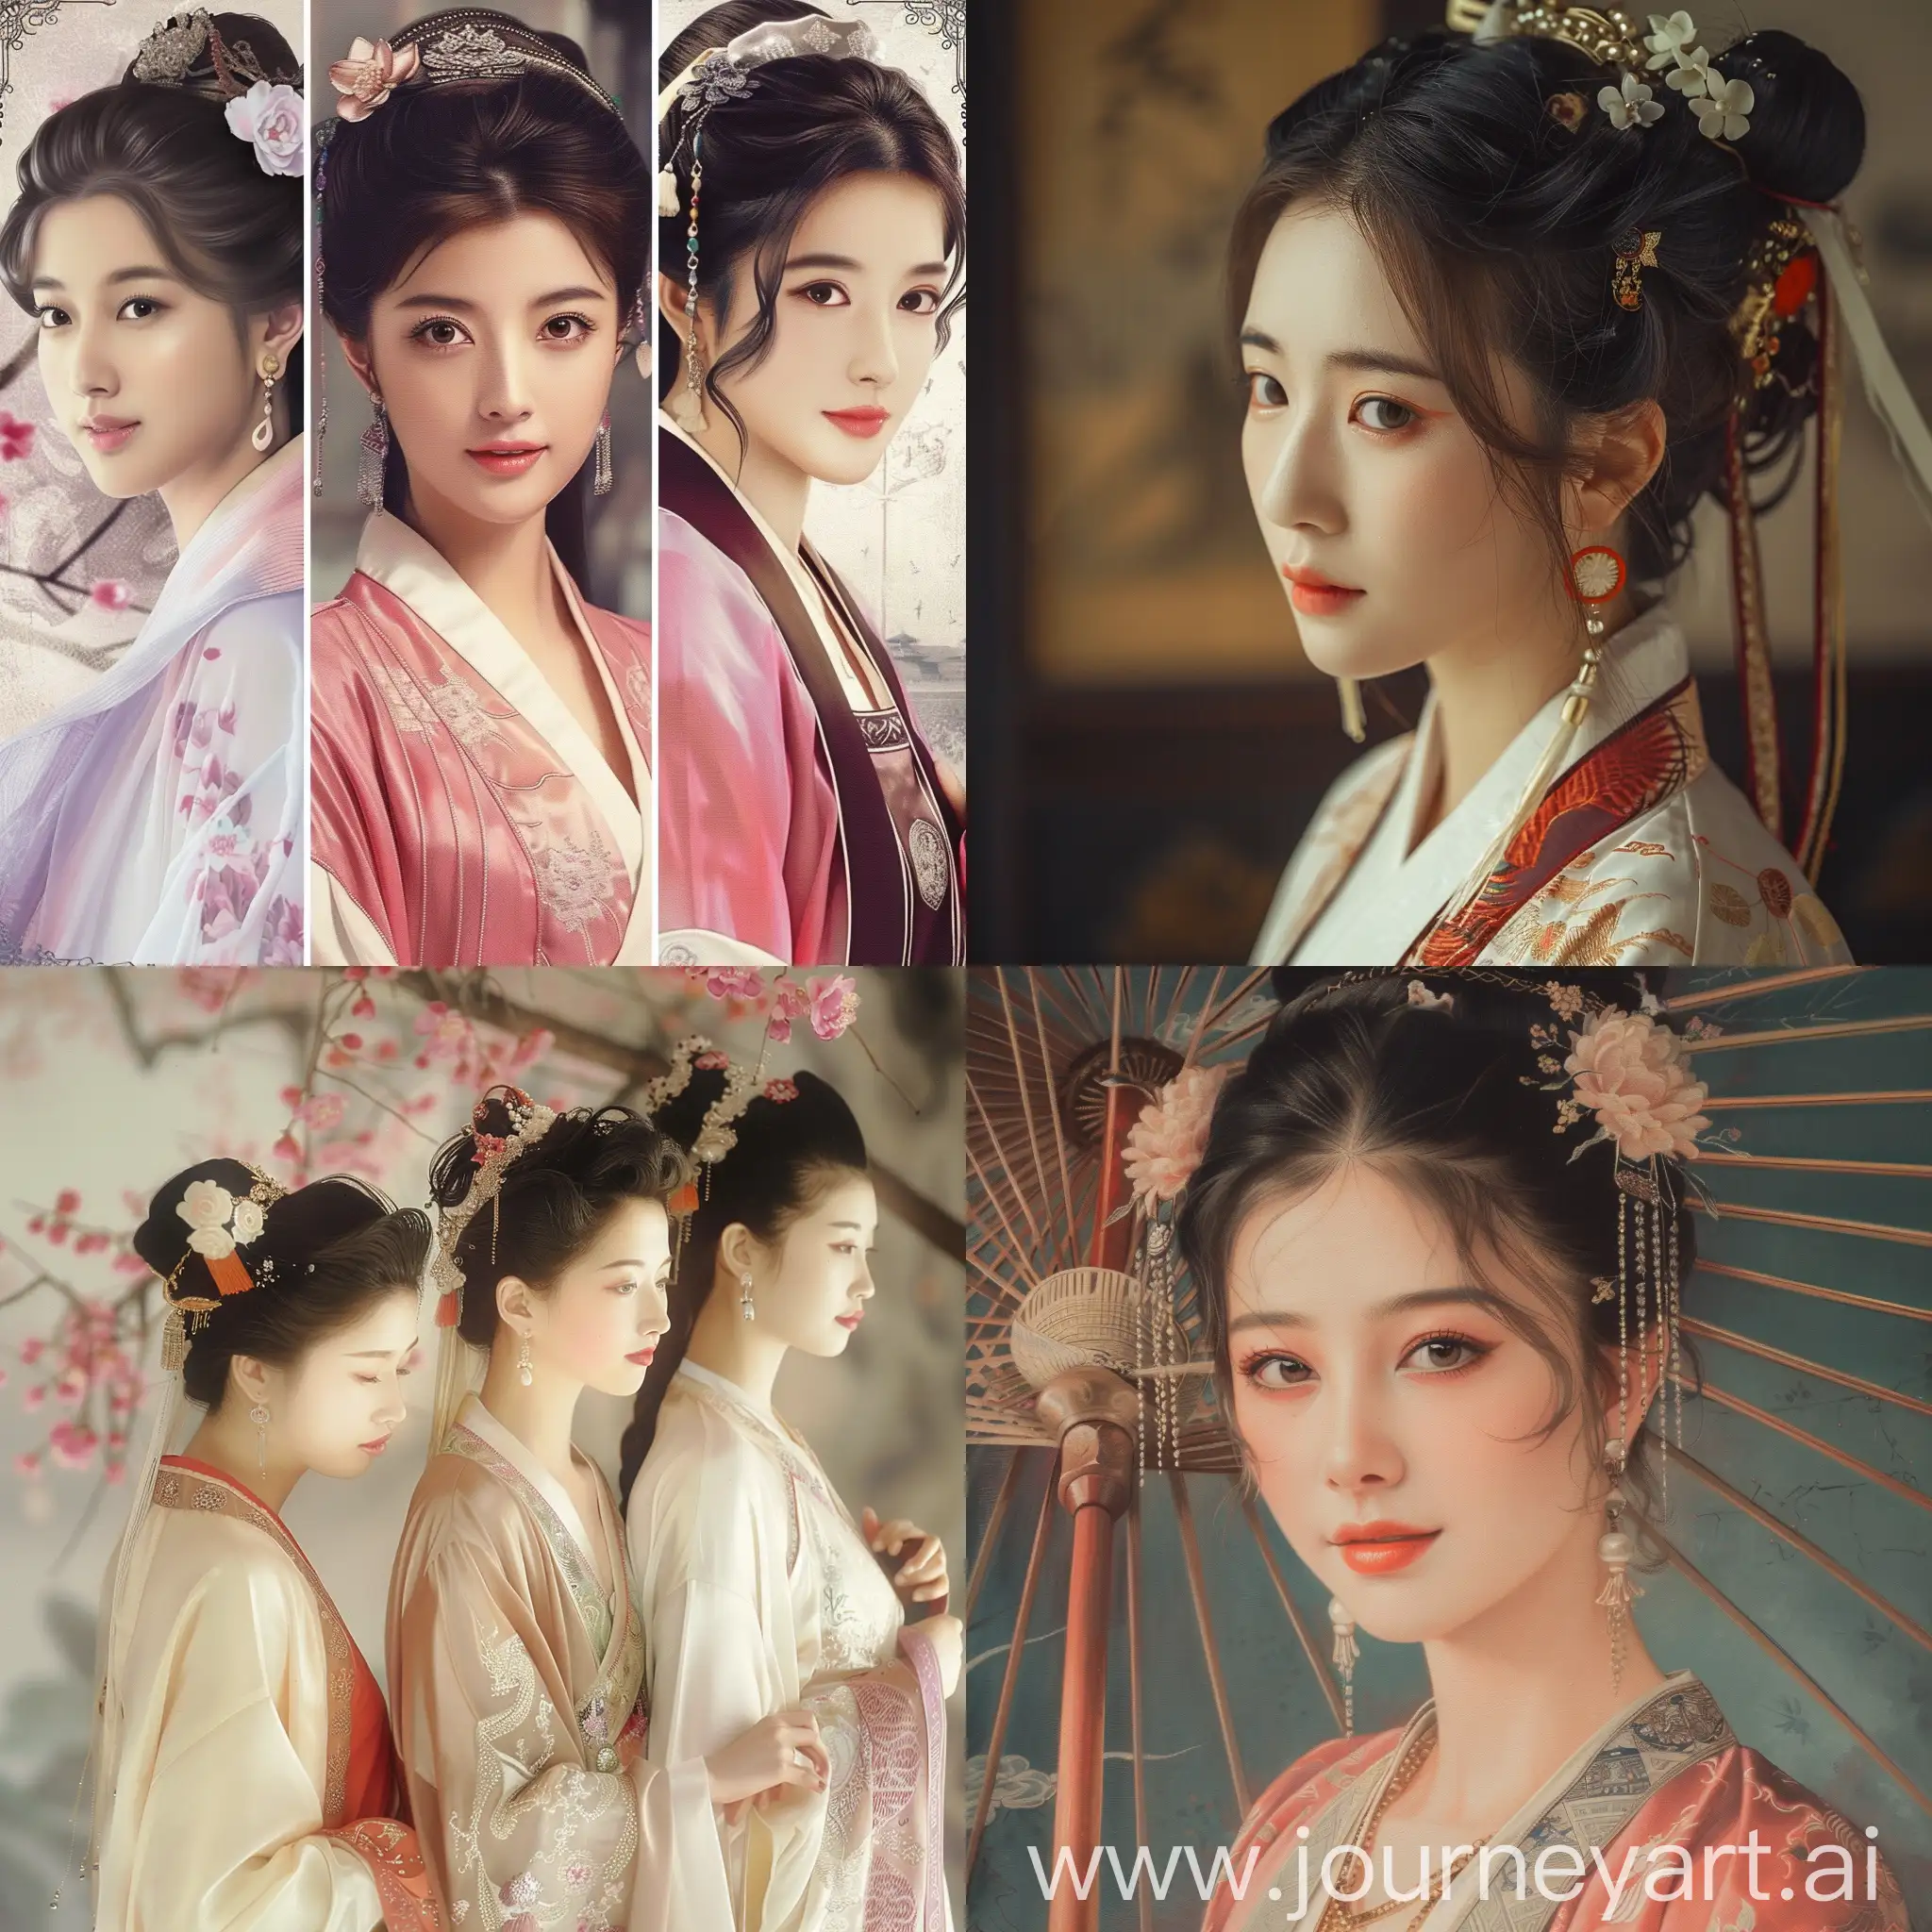 Graceful-Jiangnan-Ladies-in-Traditional-attire